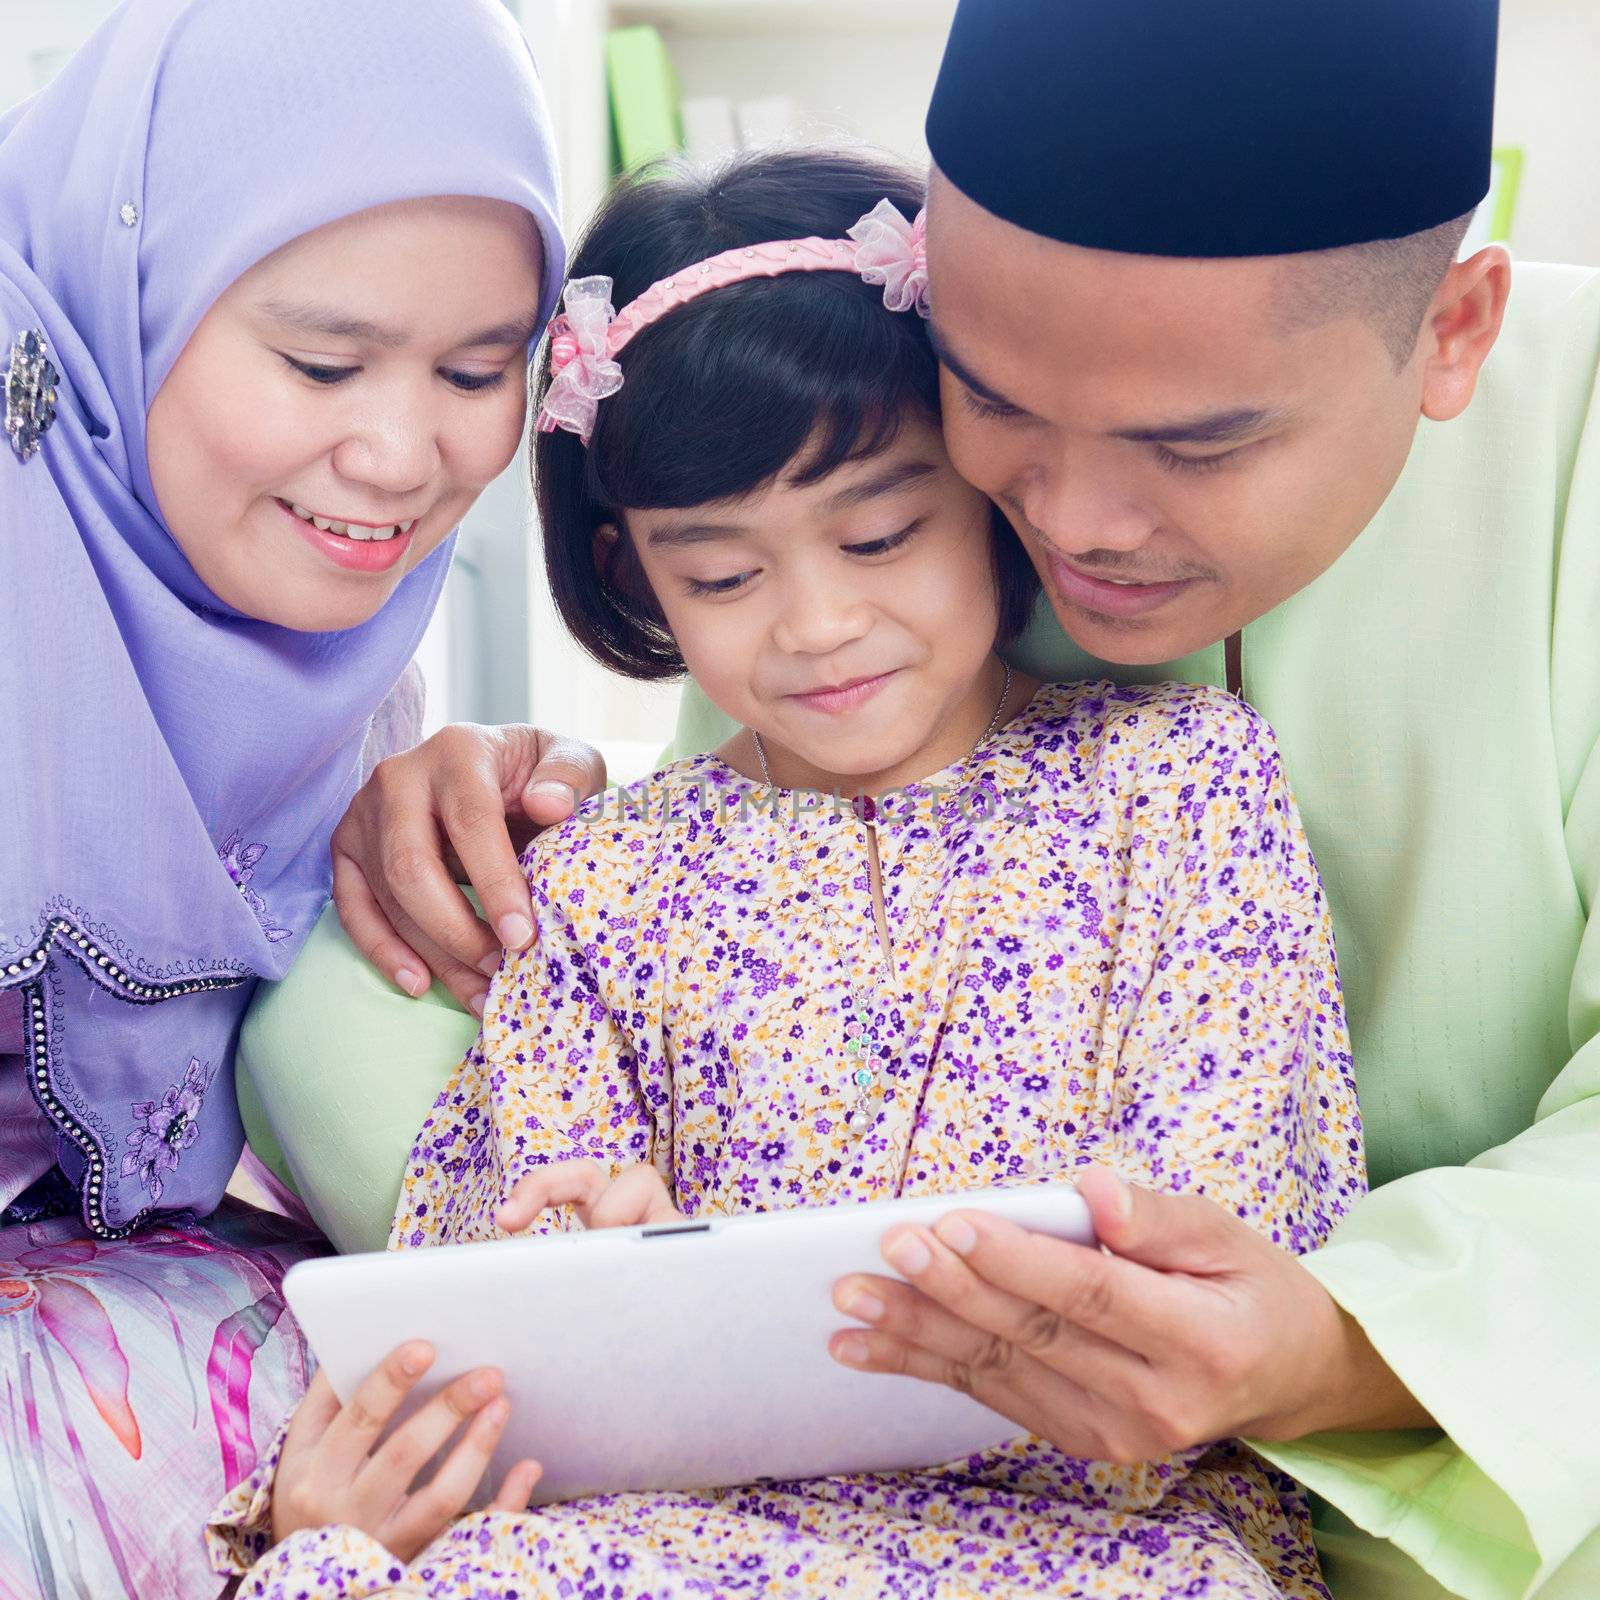 Southeast Asian family surfing internet at home. Muslim family living lifestyle